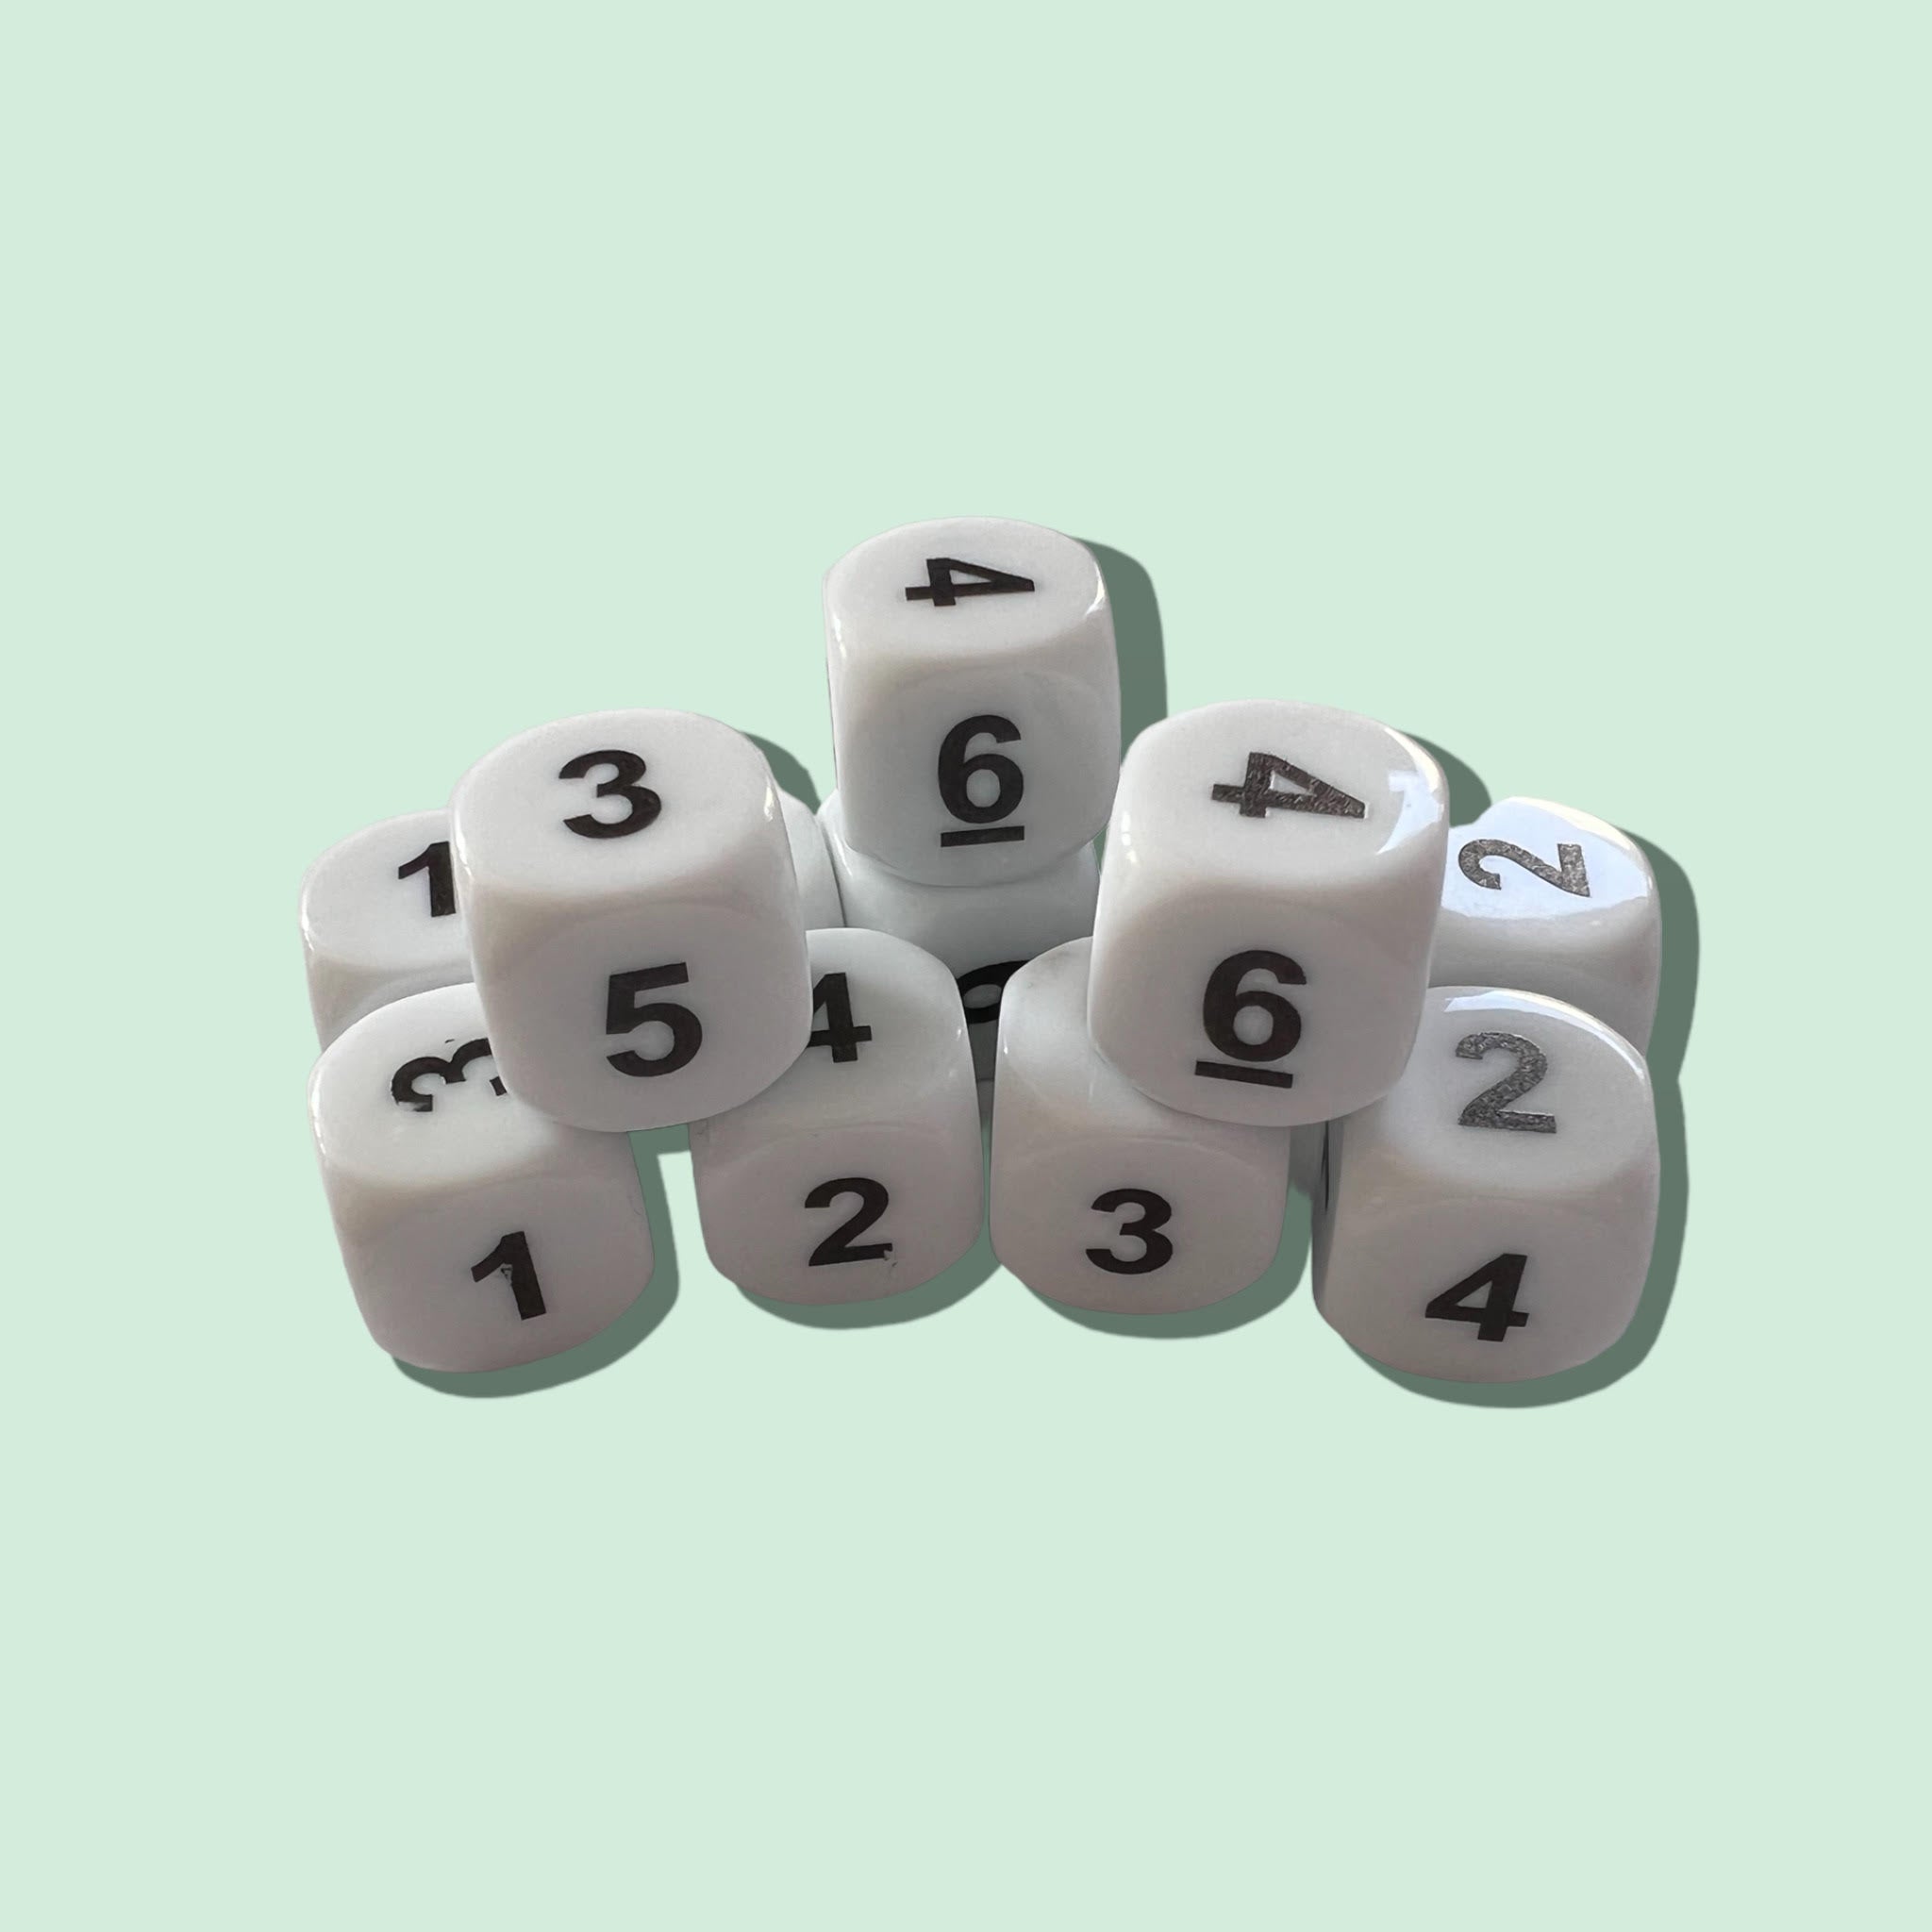 Multipack Dice - Digit Dice for use with Operations Dice